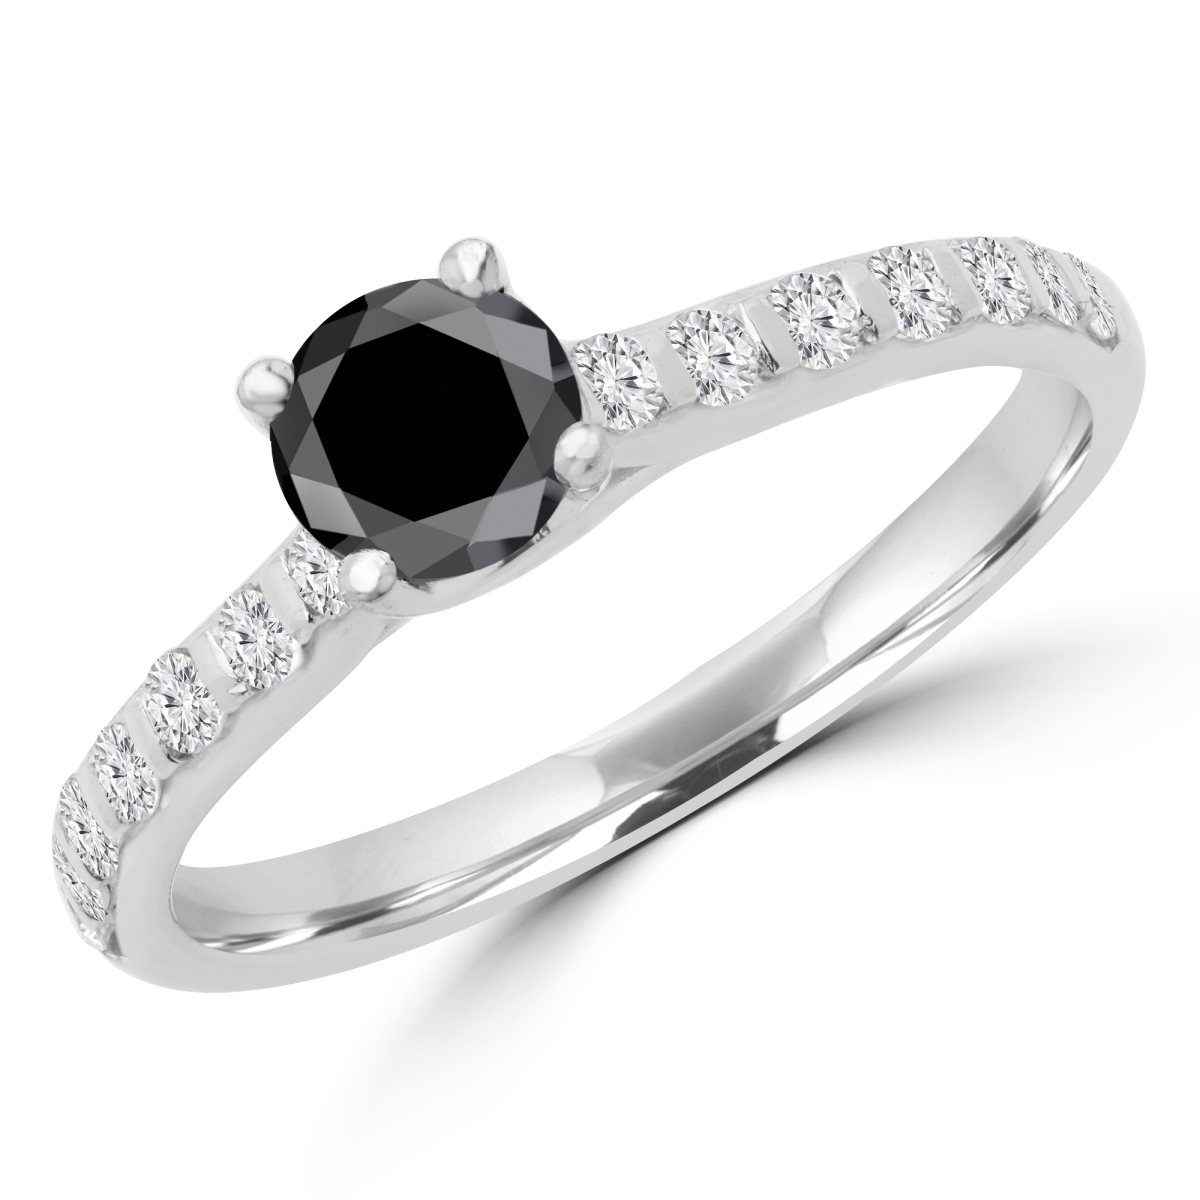 Picture of Majesty Diamonds MD180425-P 0.9 CTW Round Black Diamond Promise Solitaire with Accents Engagement Ring in 14K White Gold